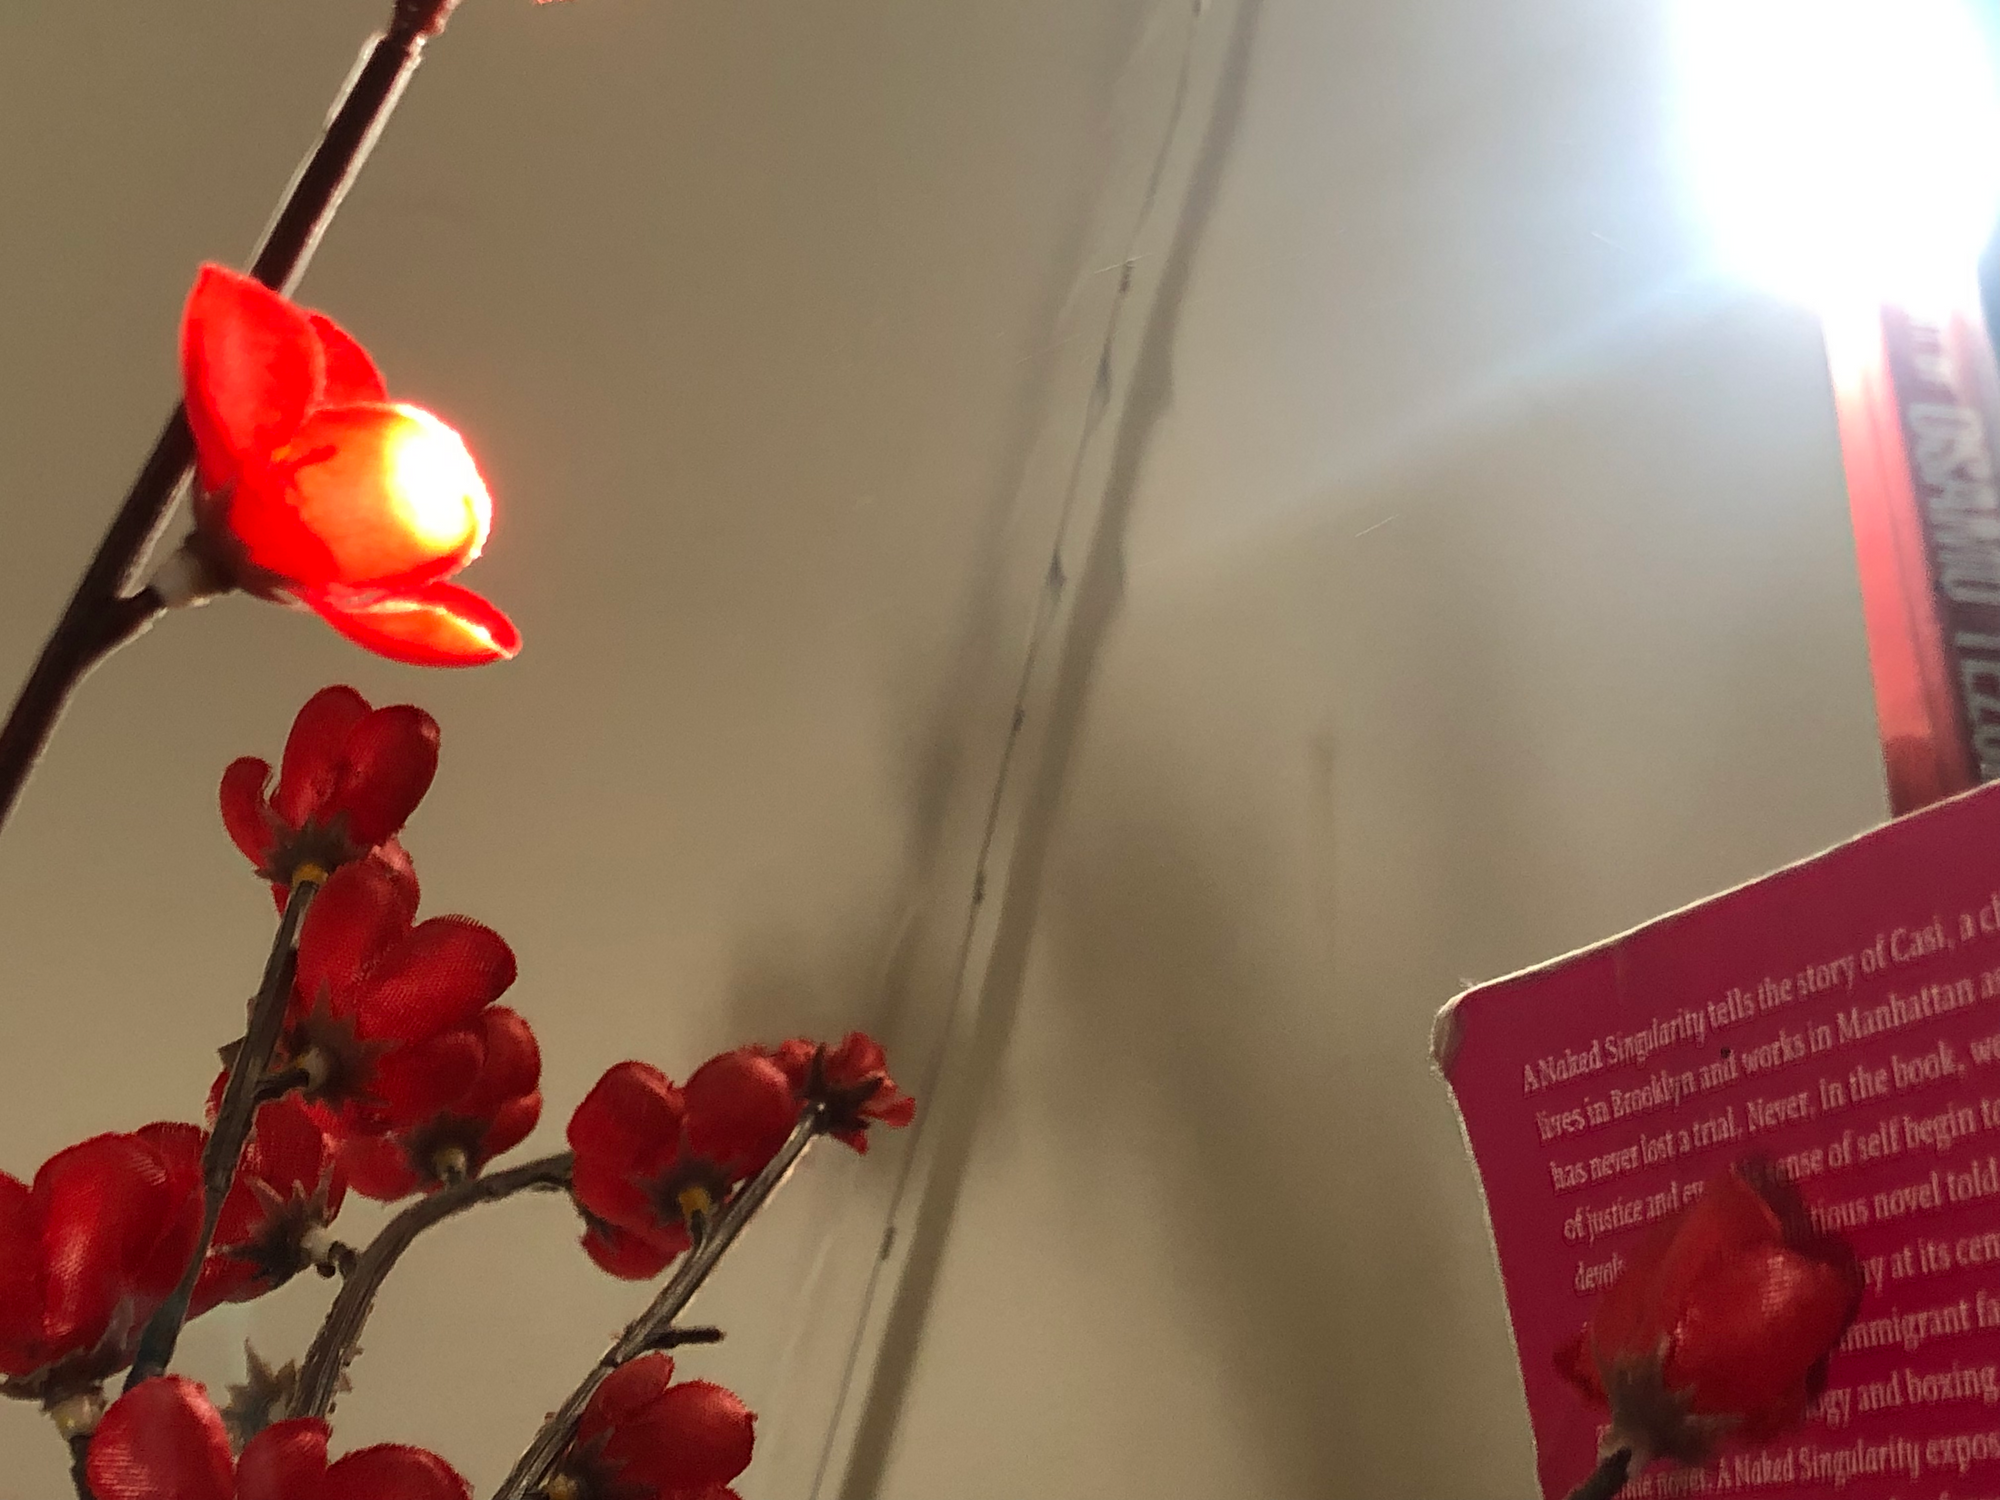 photo of a wall, sun flare at the top-right corner above a book with the spine reading "OSAMU", a LED string light handing down the middle of the frame, plastic red flowers on brown branches at bottom-right, one of them reaching across the frame and leaning against a pink book that reads, on the back, at the top, "A Naked Singularity tells the story of Casi...". taken at the robledo art, strike! headquarters, february 2023.